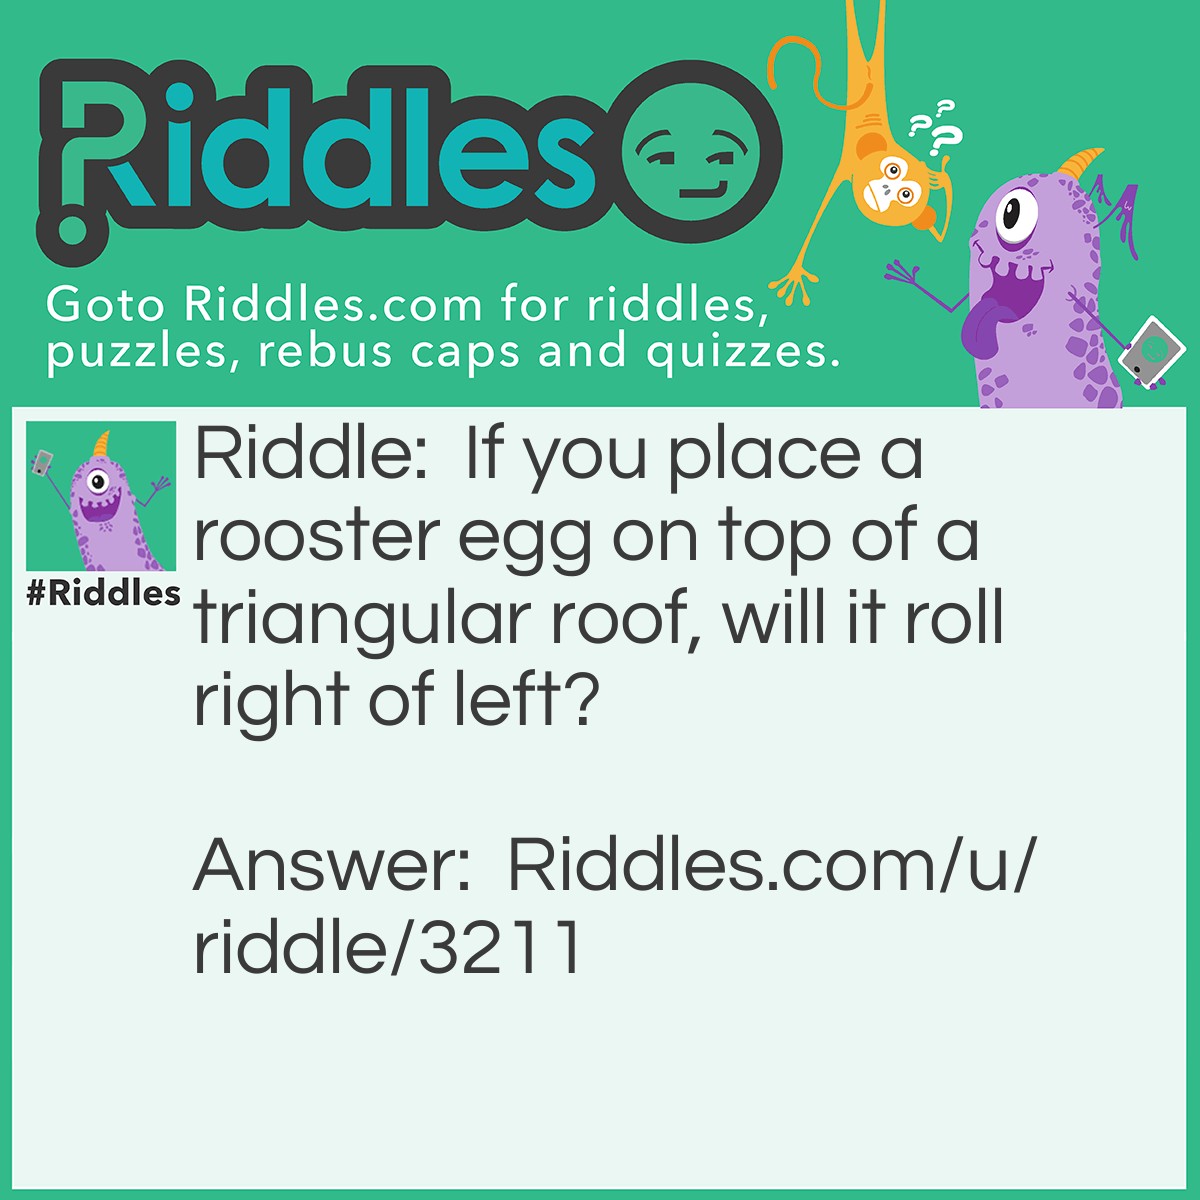 Riddle: If you place a rooster egg on top of a triangular roof, will it roll right of left? Answer: Neither, roosters don't lay eggs!